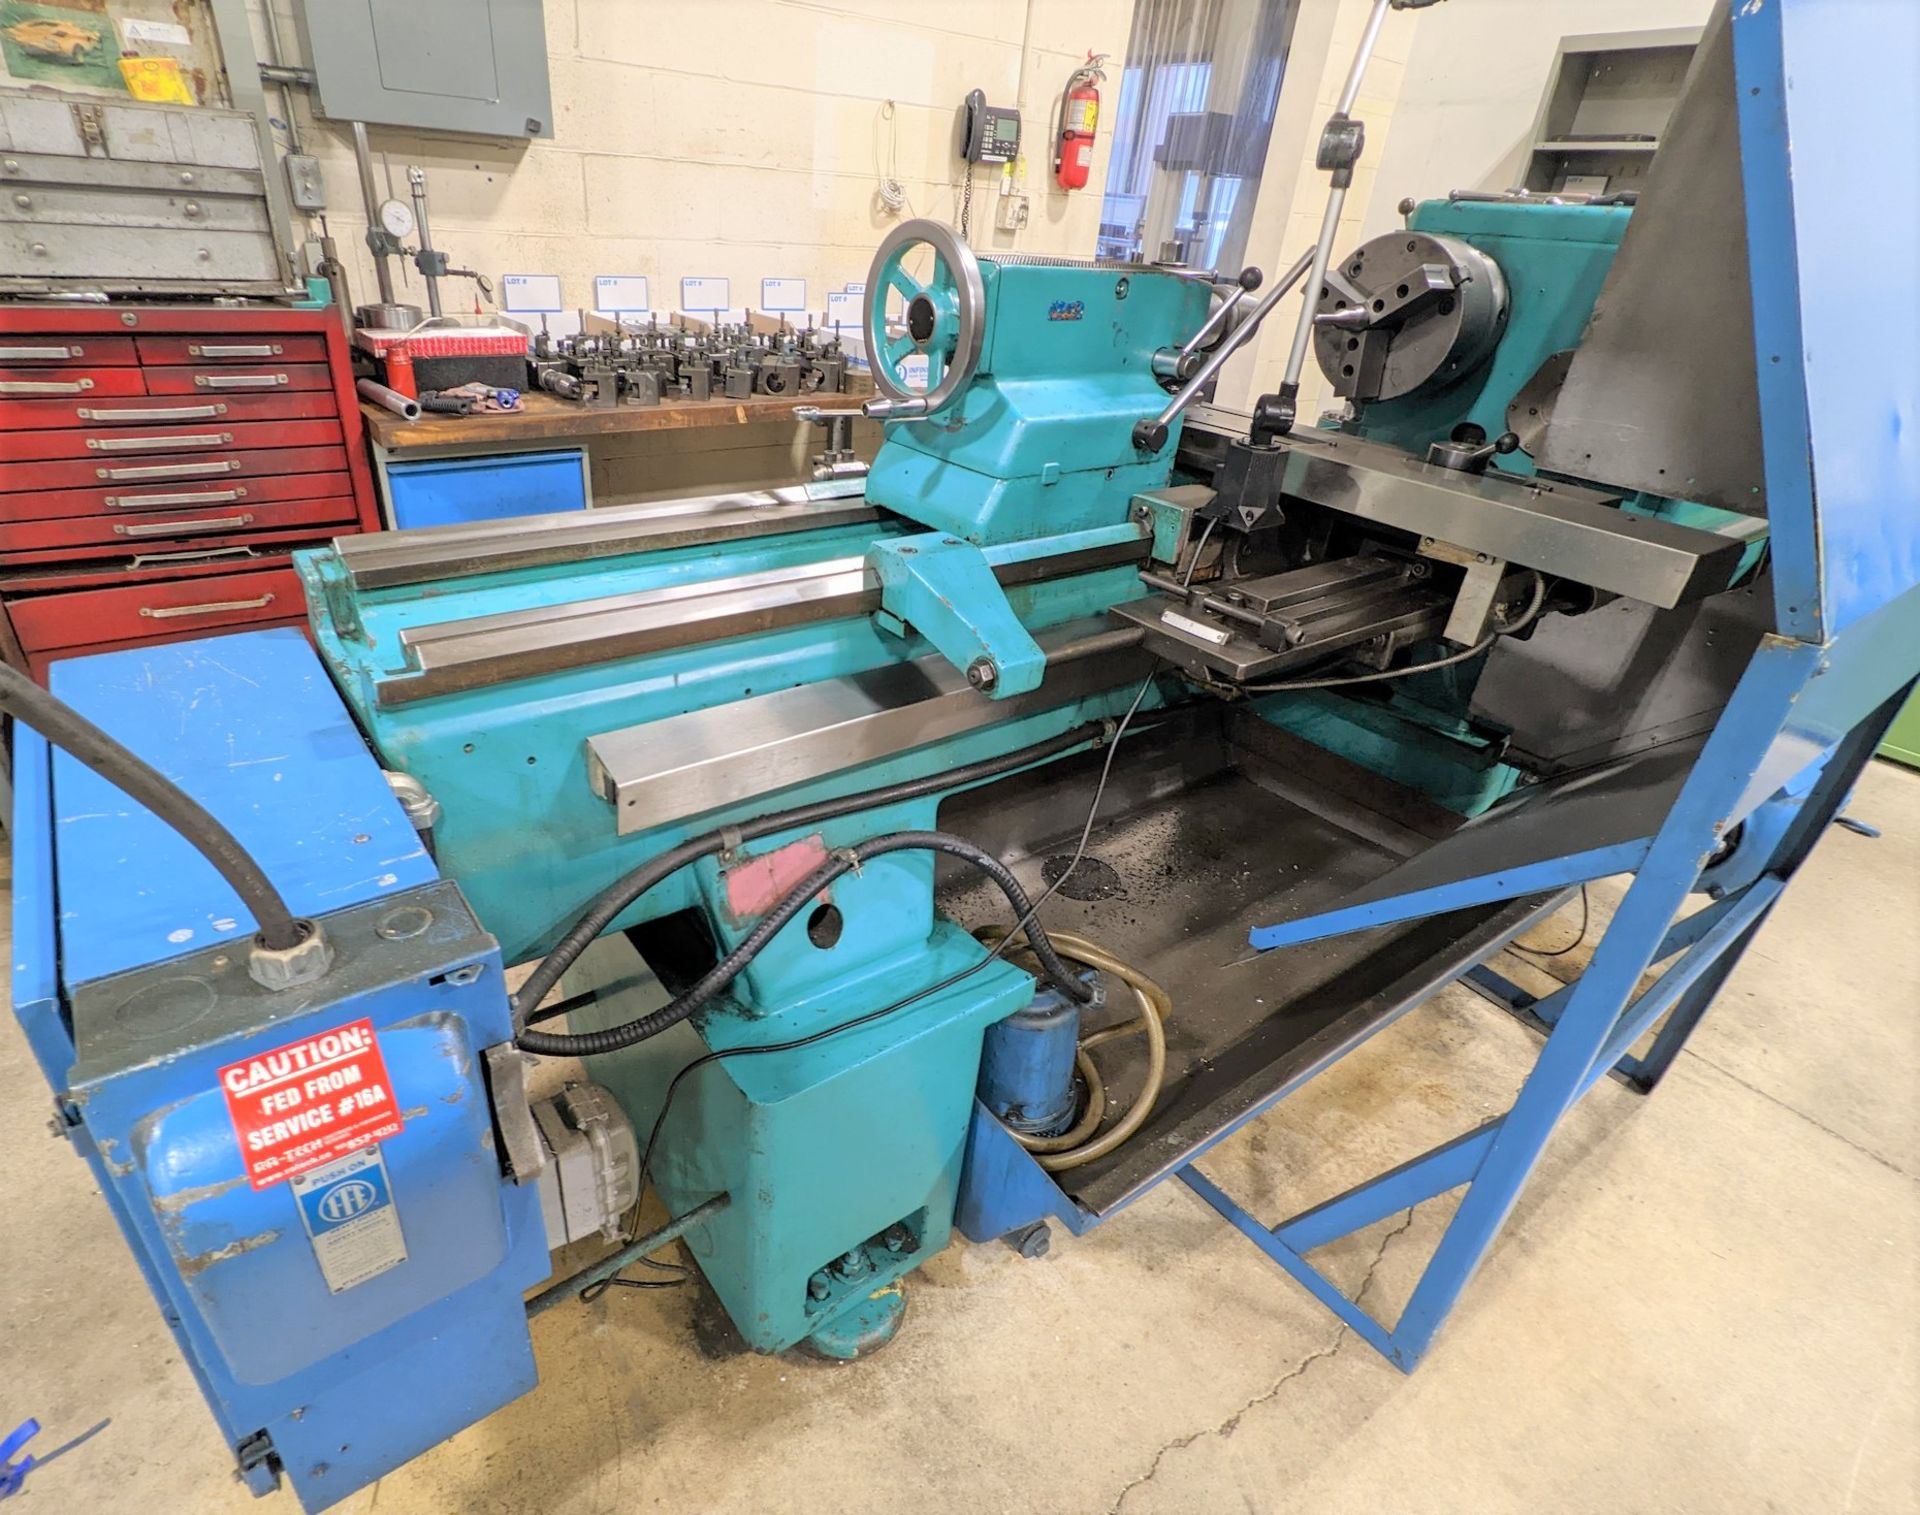 VDF BOEHRINGER GOPPINGEN LATHE, ACU-RITE 2-AXIS DRO, 10” 3-JAW CHUCK, 22” SWING, 60” BED, TOOL POST, - Image 9 of 24